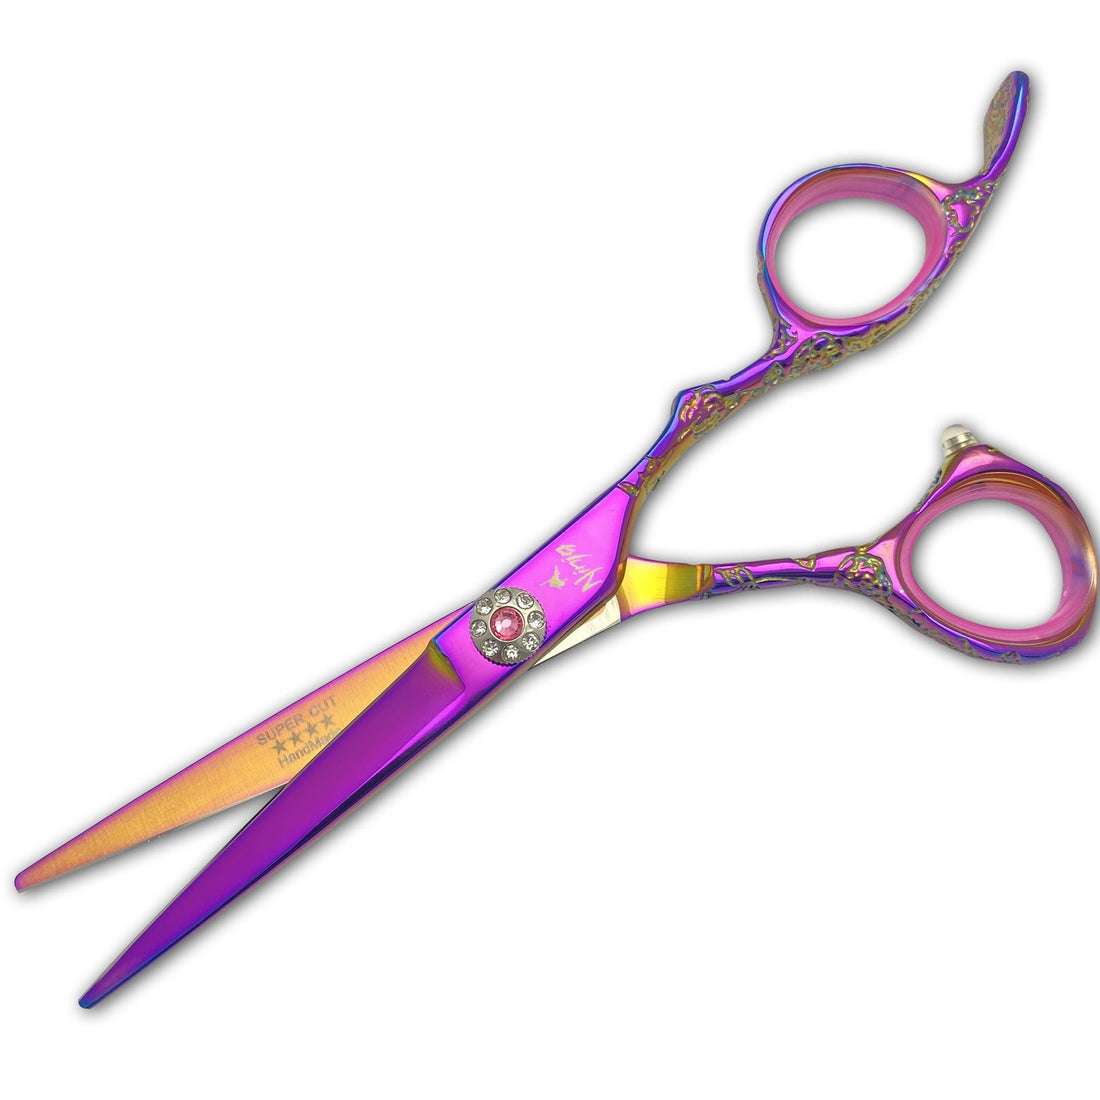 German Scissors V.s. Japanese Scissors: Everything you need to know